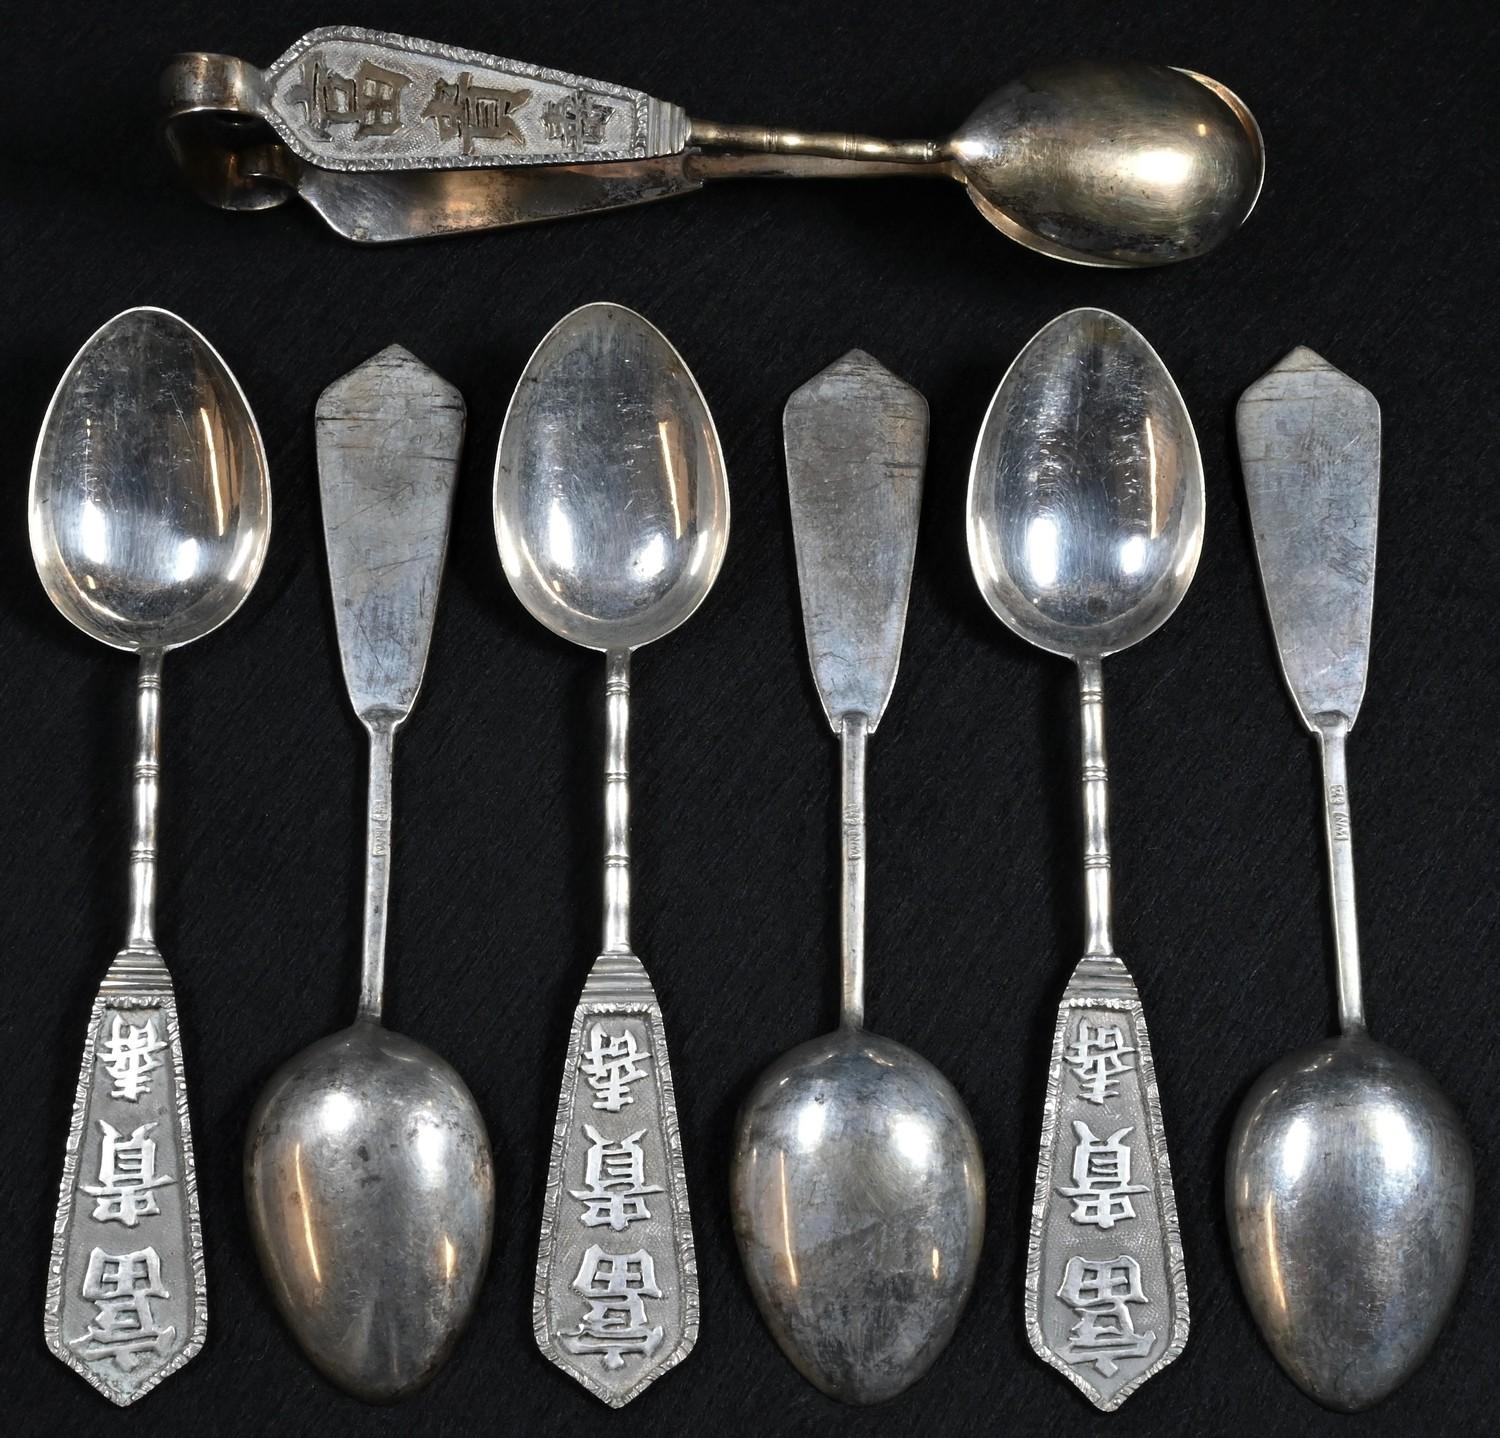 A set of six Chinese silver teaspoons and sugar tongs en suite, their respective handles and bows in